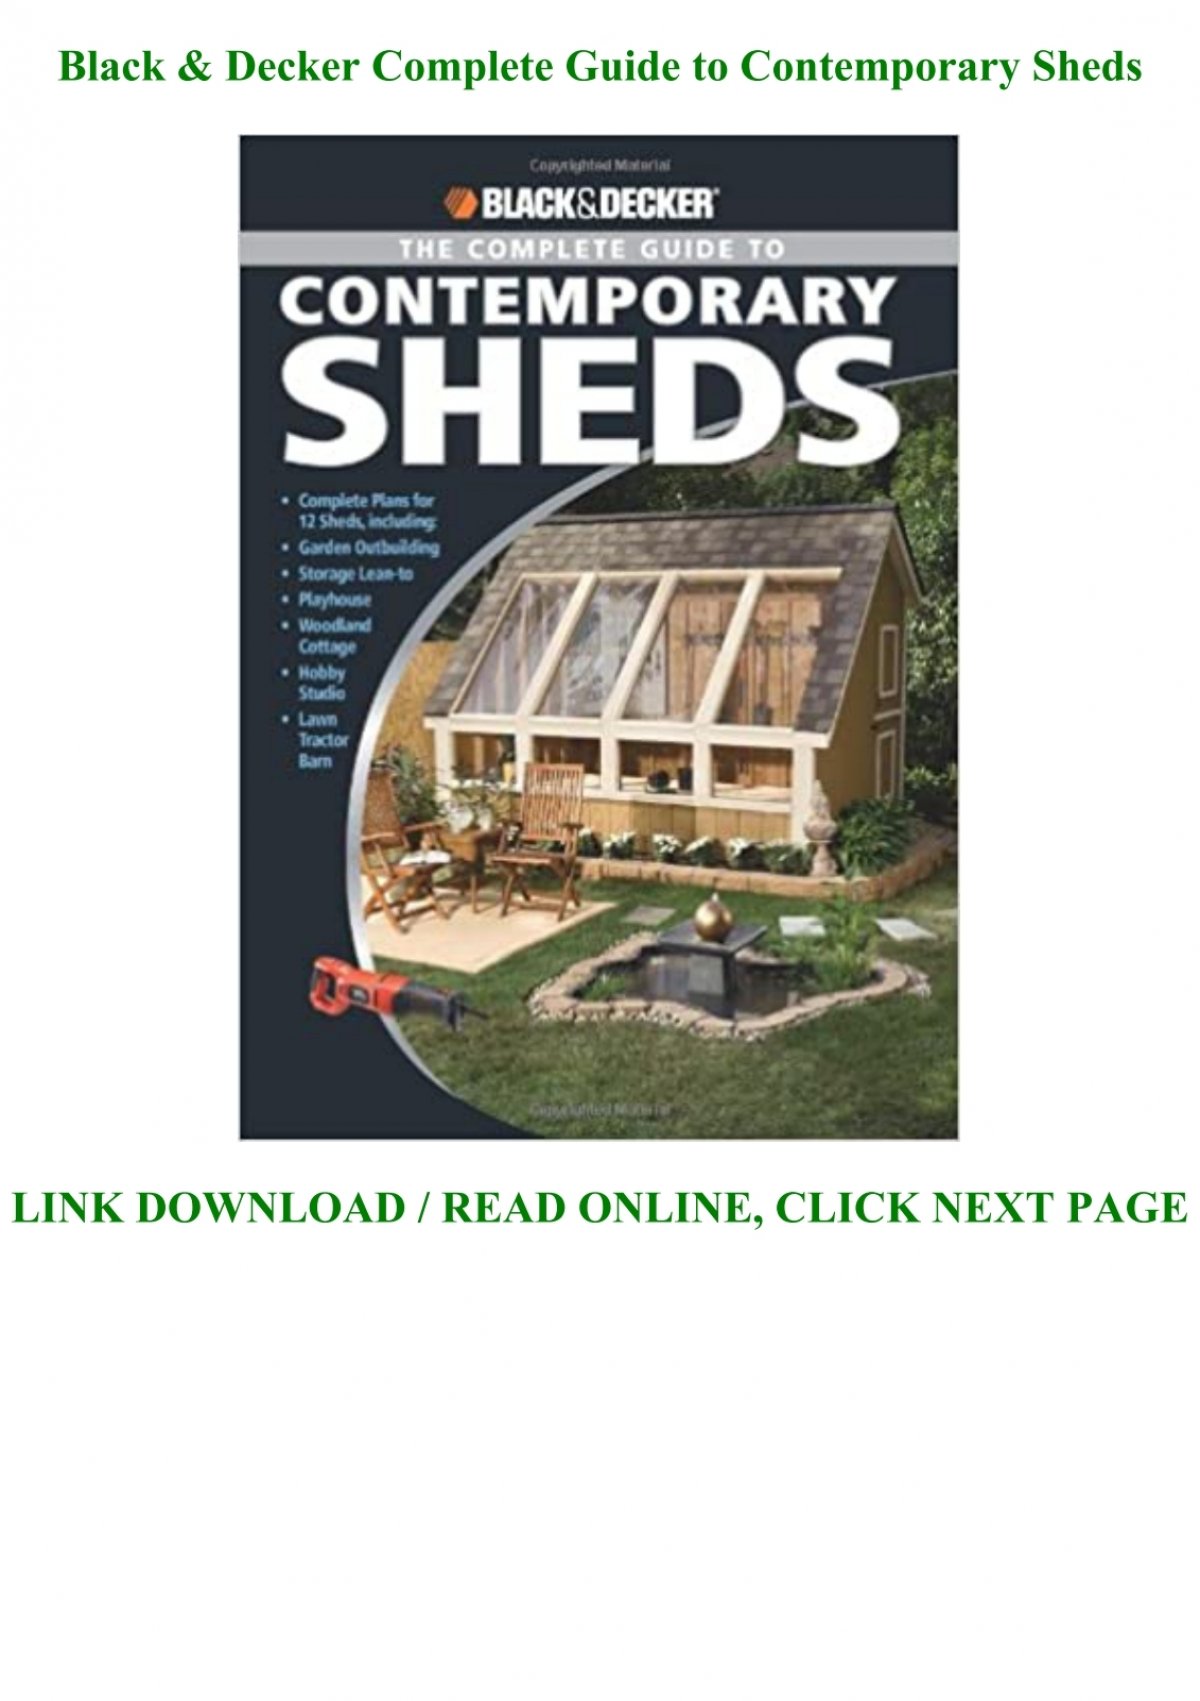 Black and Decker Complete Guide to Sheds at